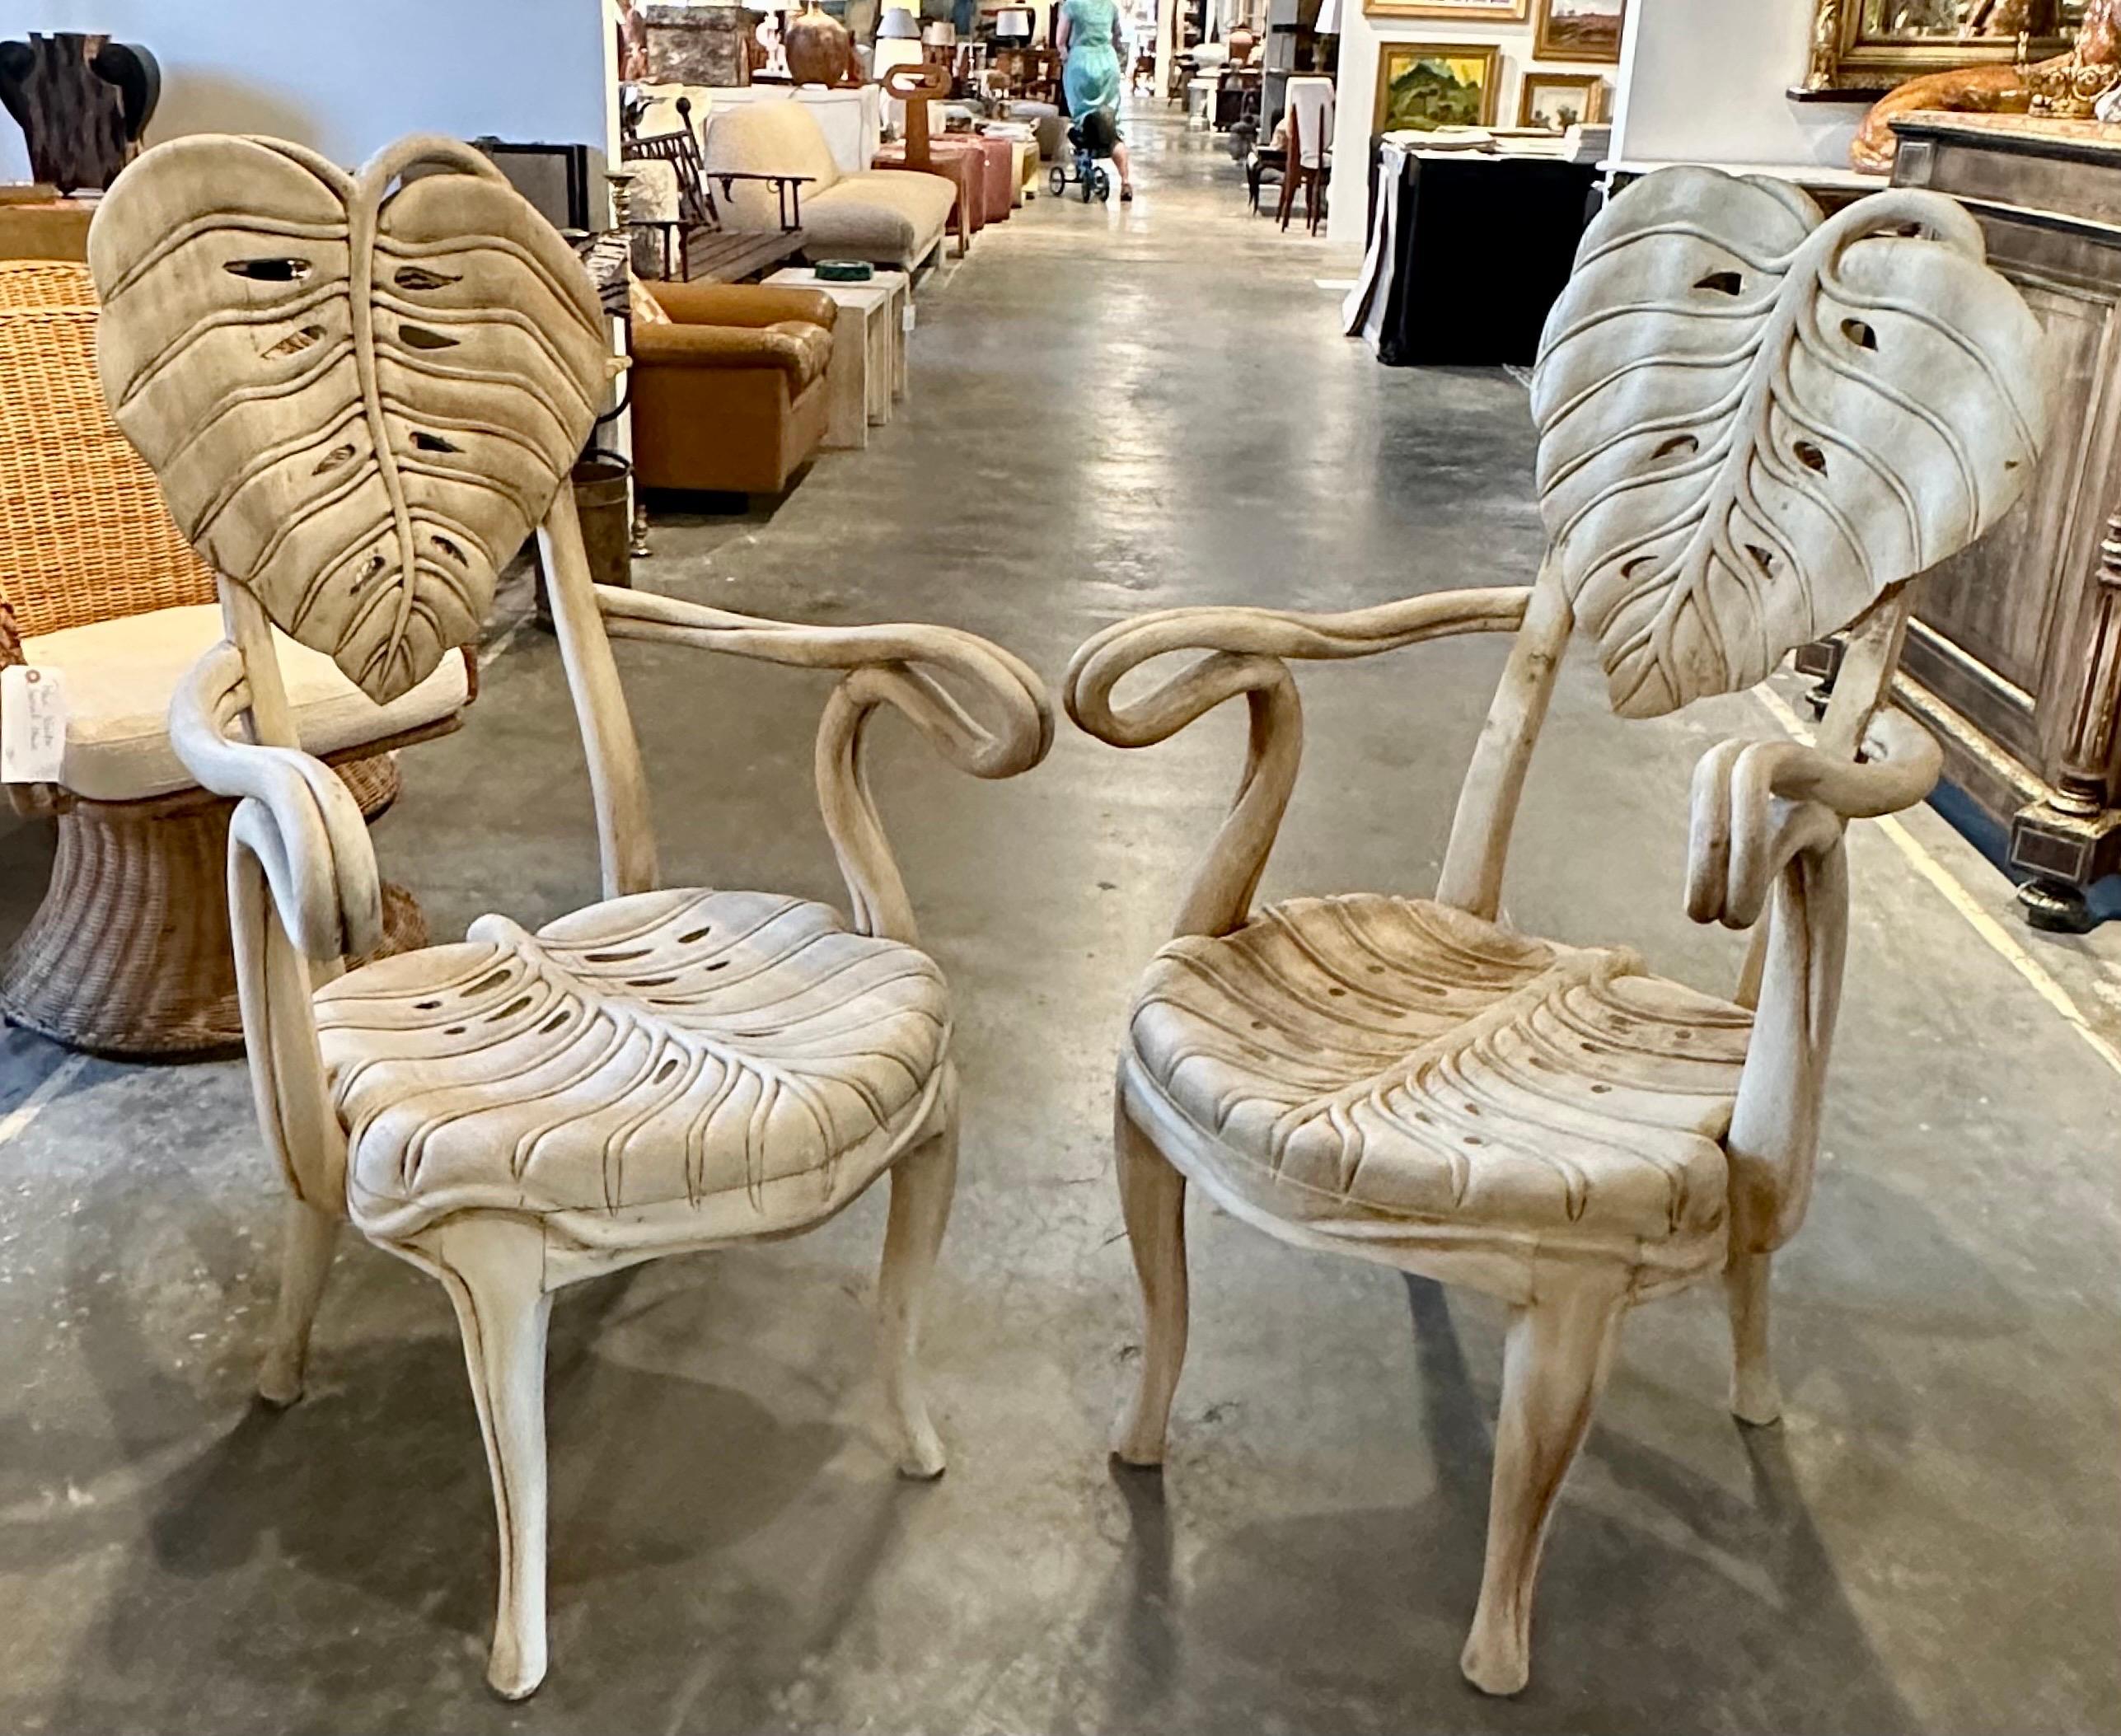 A pair of handcrafted leaf chairs of woods. Chair are a pair but the design due to the handcrafted nature do have some differences in the design.
Chairs are in the atyle of Bartolozzi and Maioli.
The finish is bleached wood.Arm height 28.0